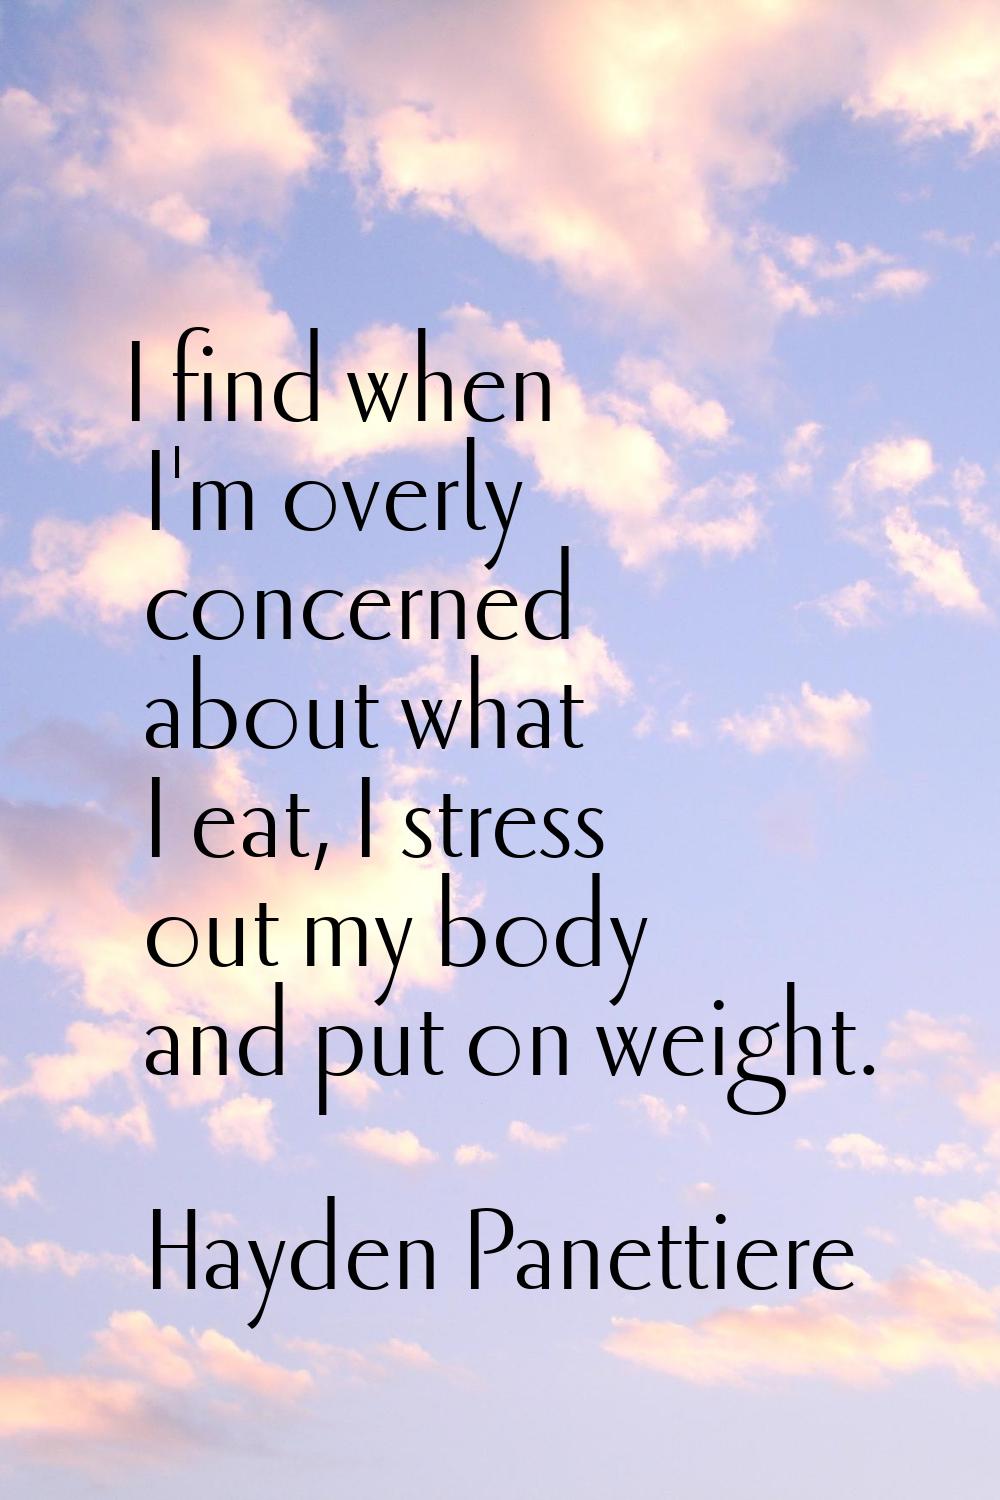 I find when I'm overly concerned about what I eat, I stress out my body and put on weight.